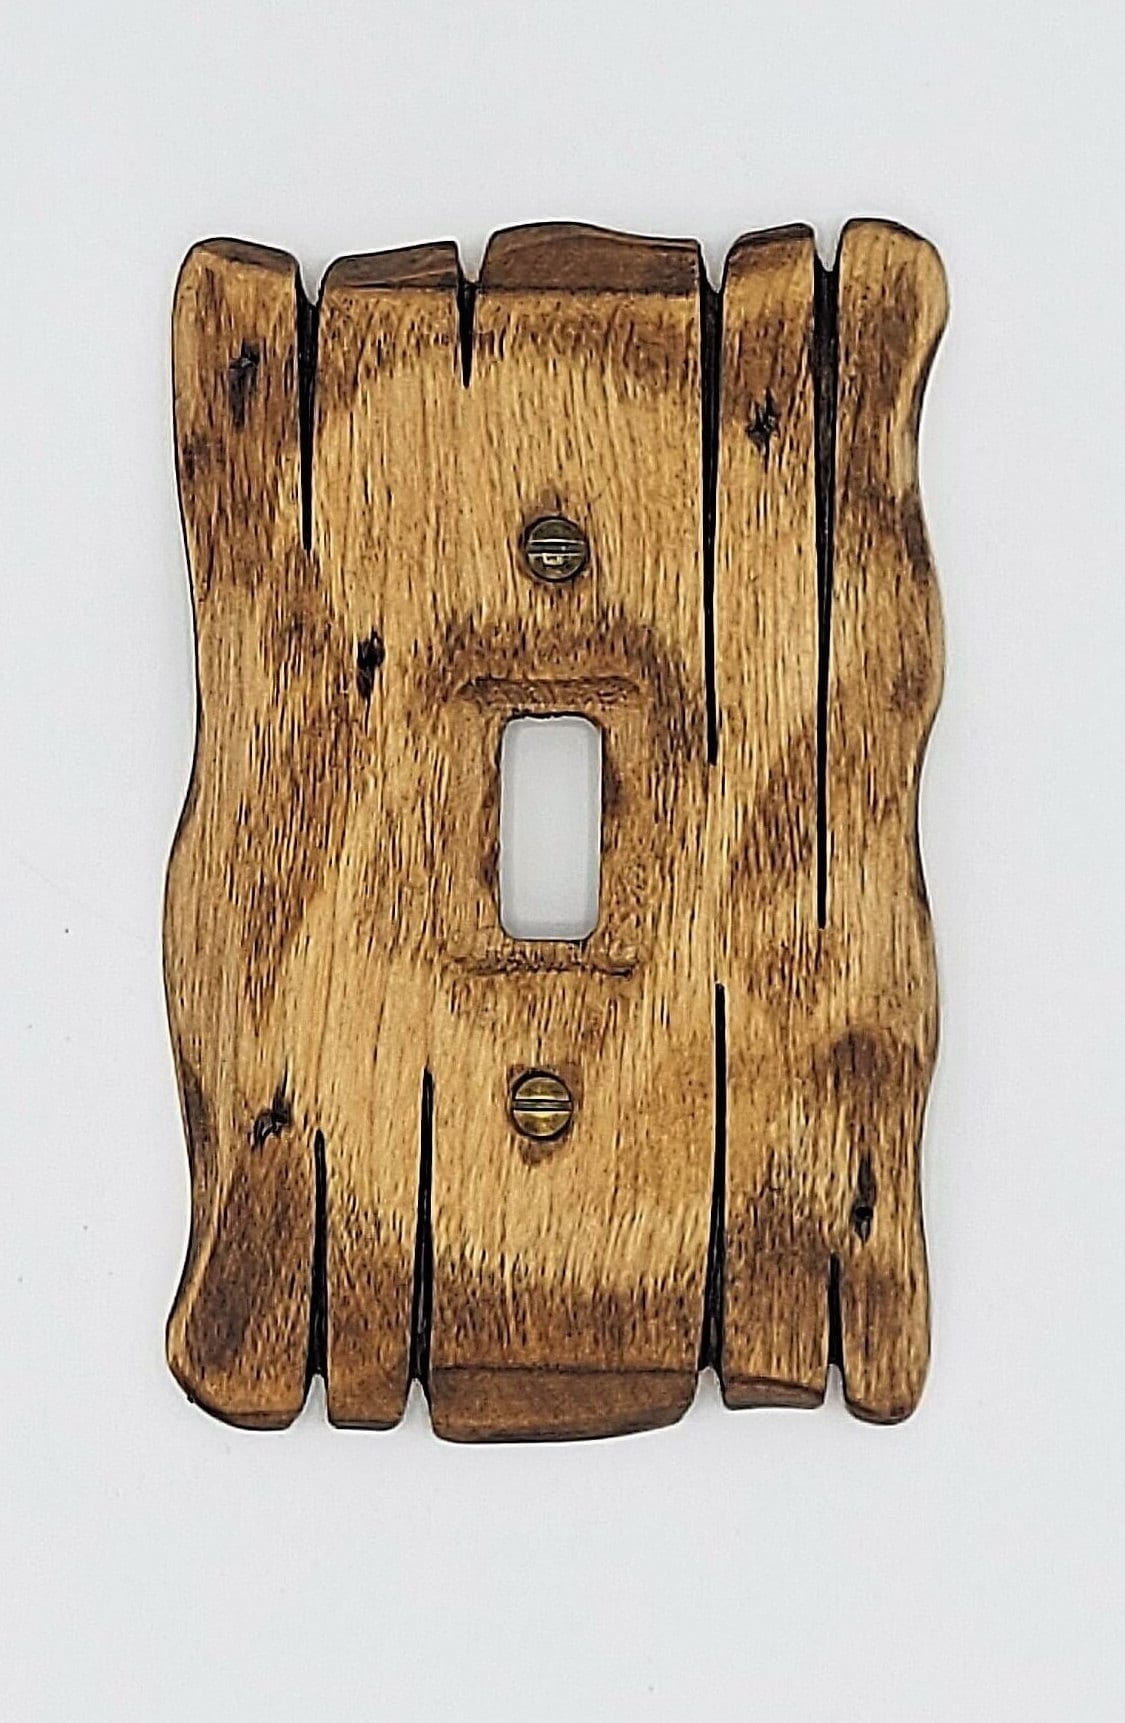 Wood Light Switch Cover 